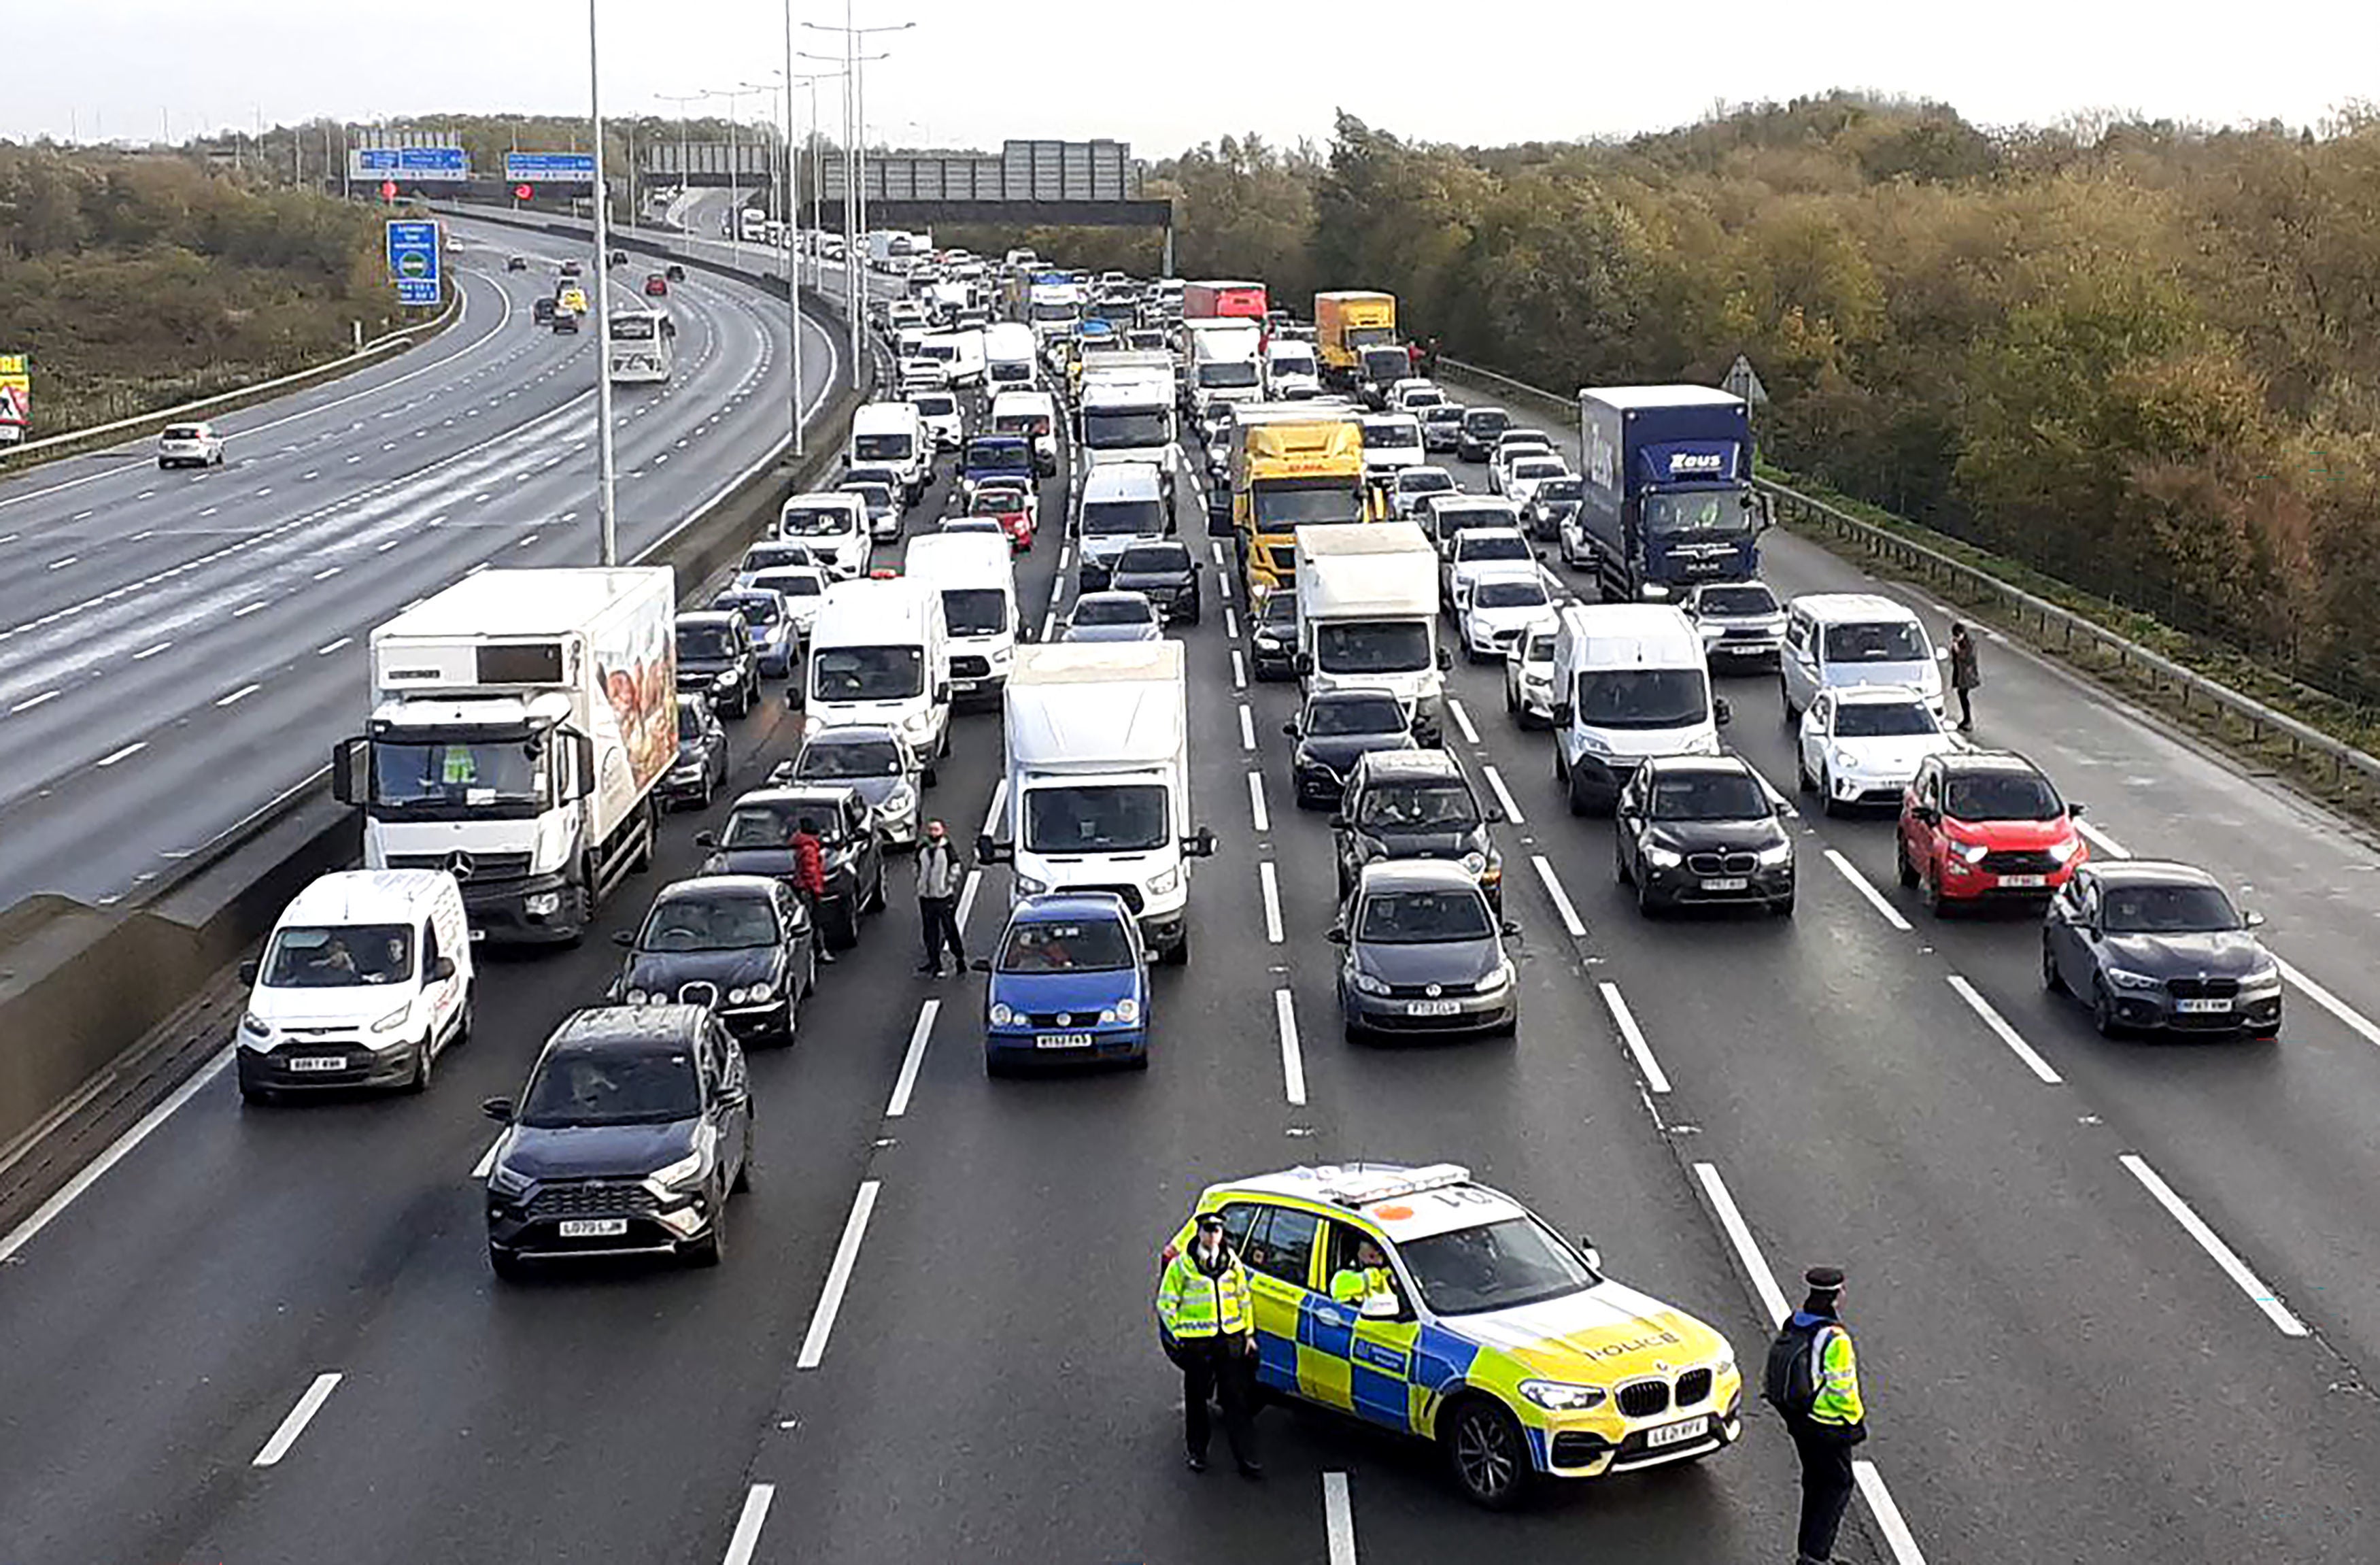 Sections of the M25 have been closed on a number of days this week due to protests